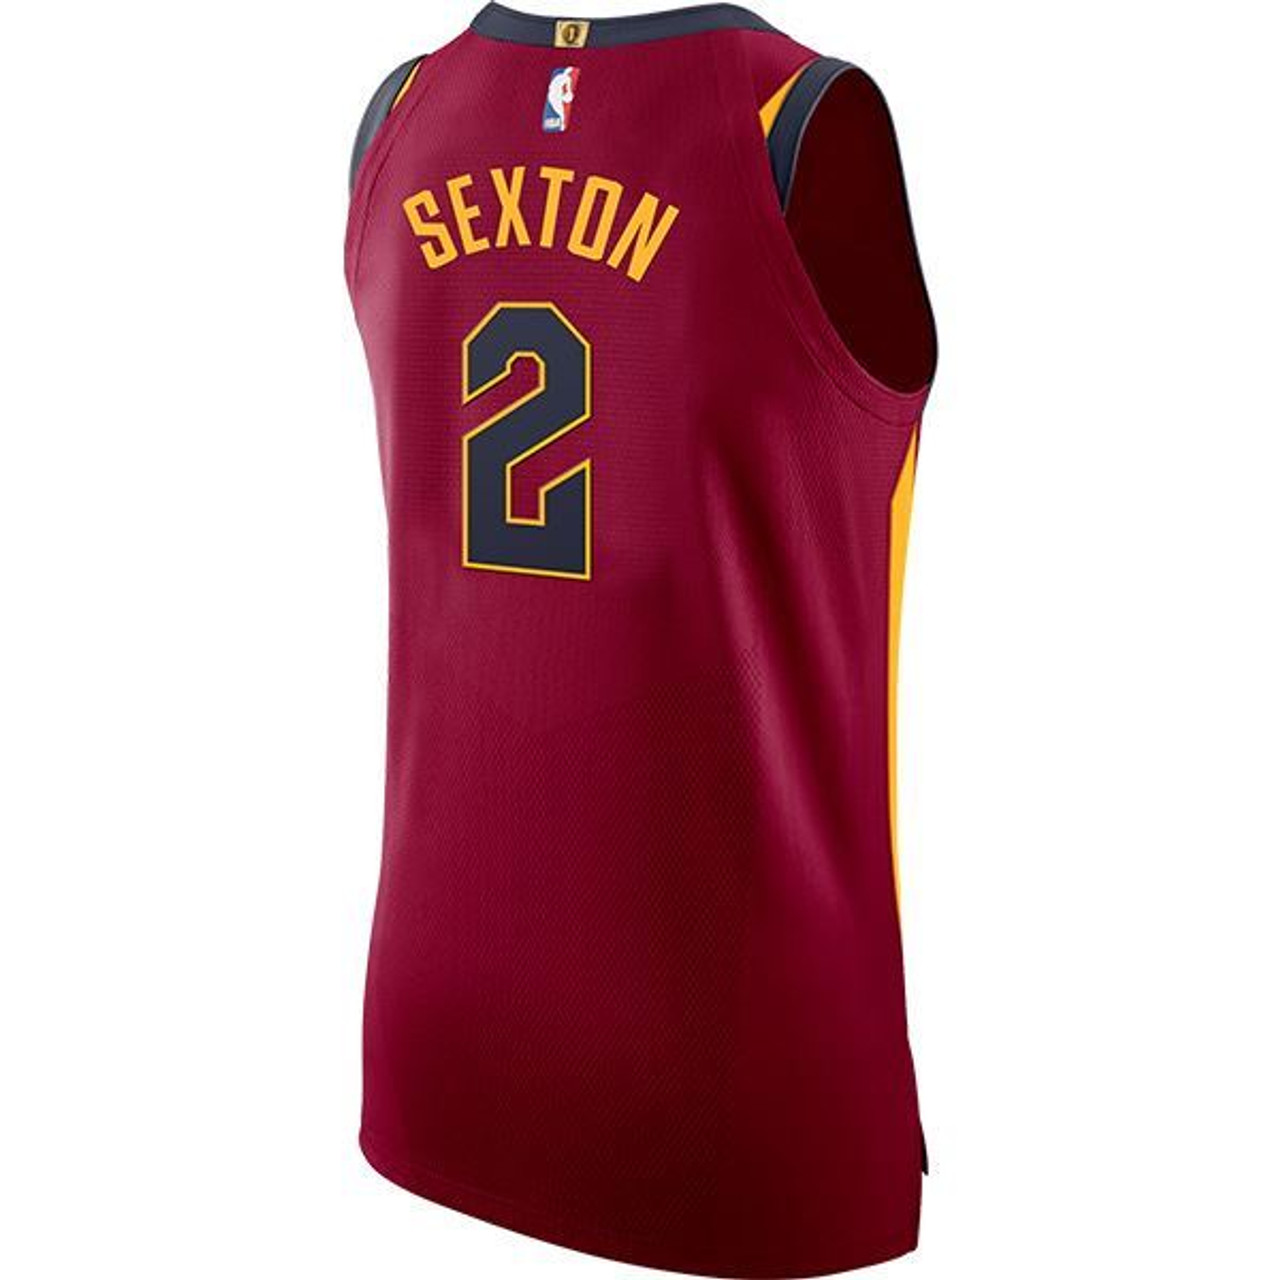 [WINE] #2 Collin Sexton Authentic Jersey | Cleveland Cavaliers